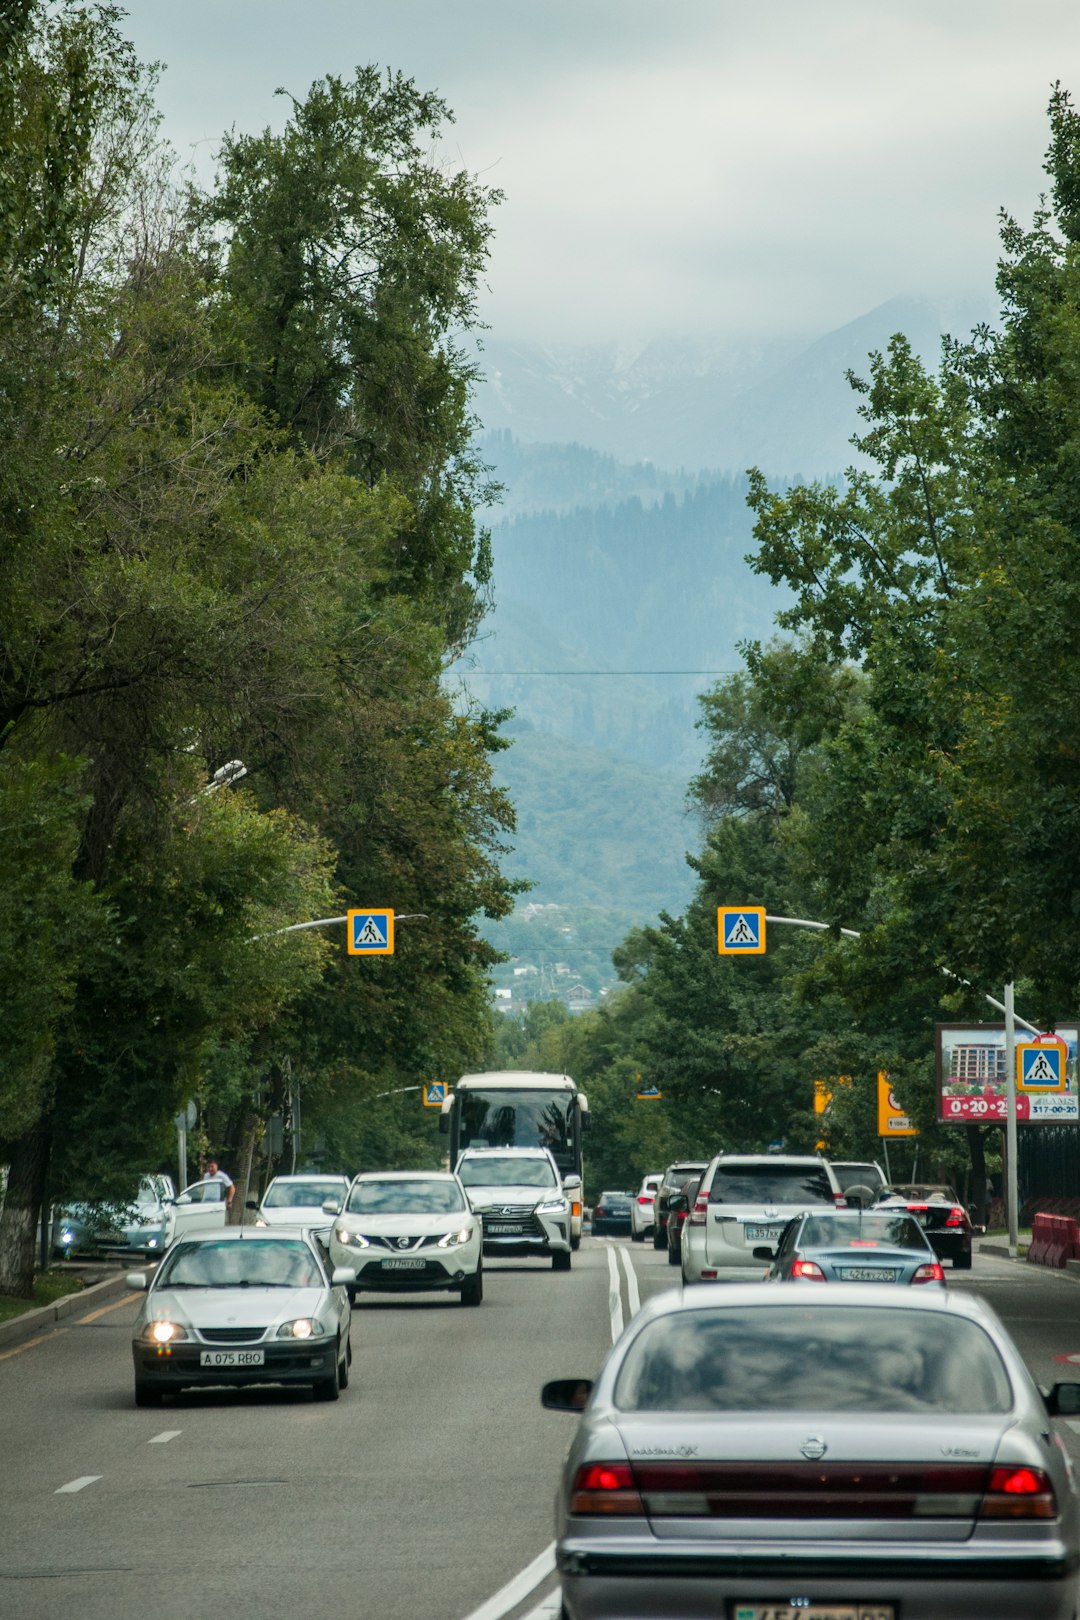 vehicles on road at daytime